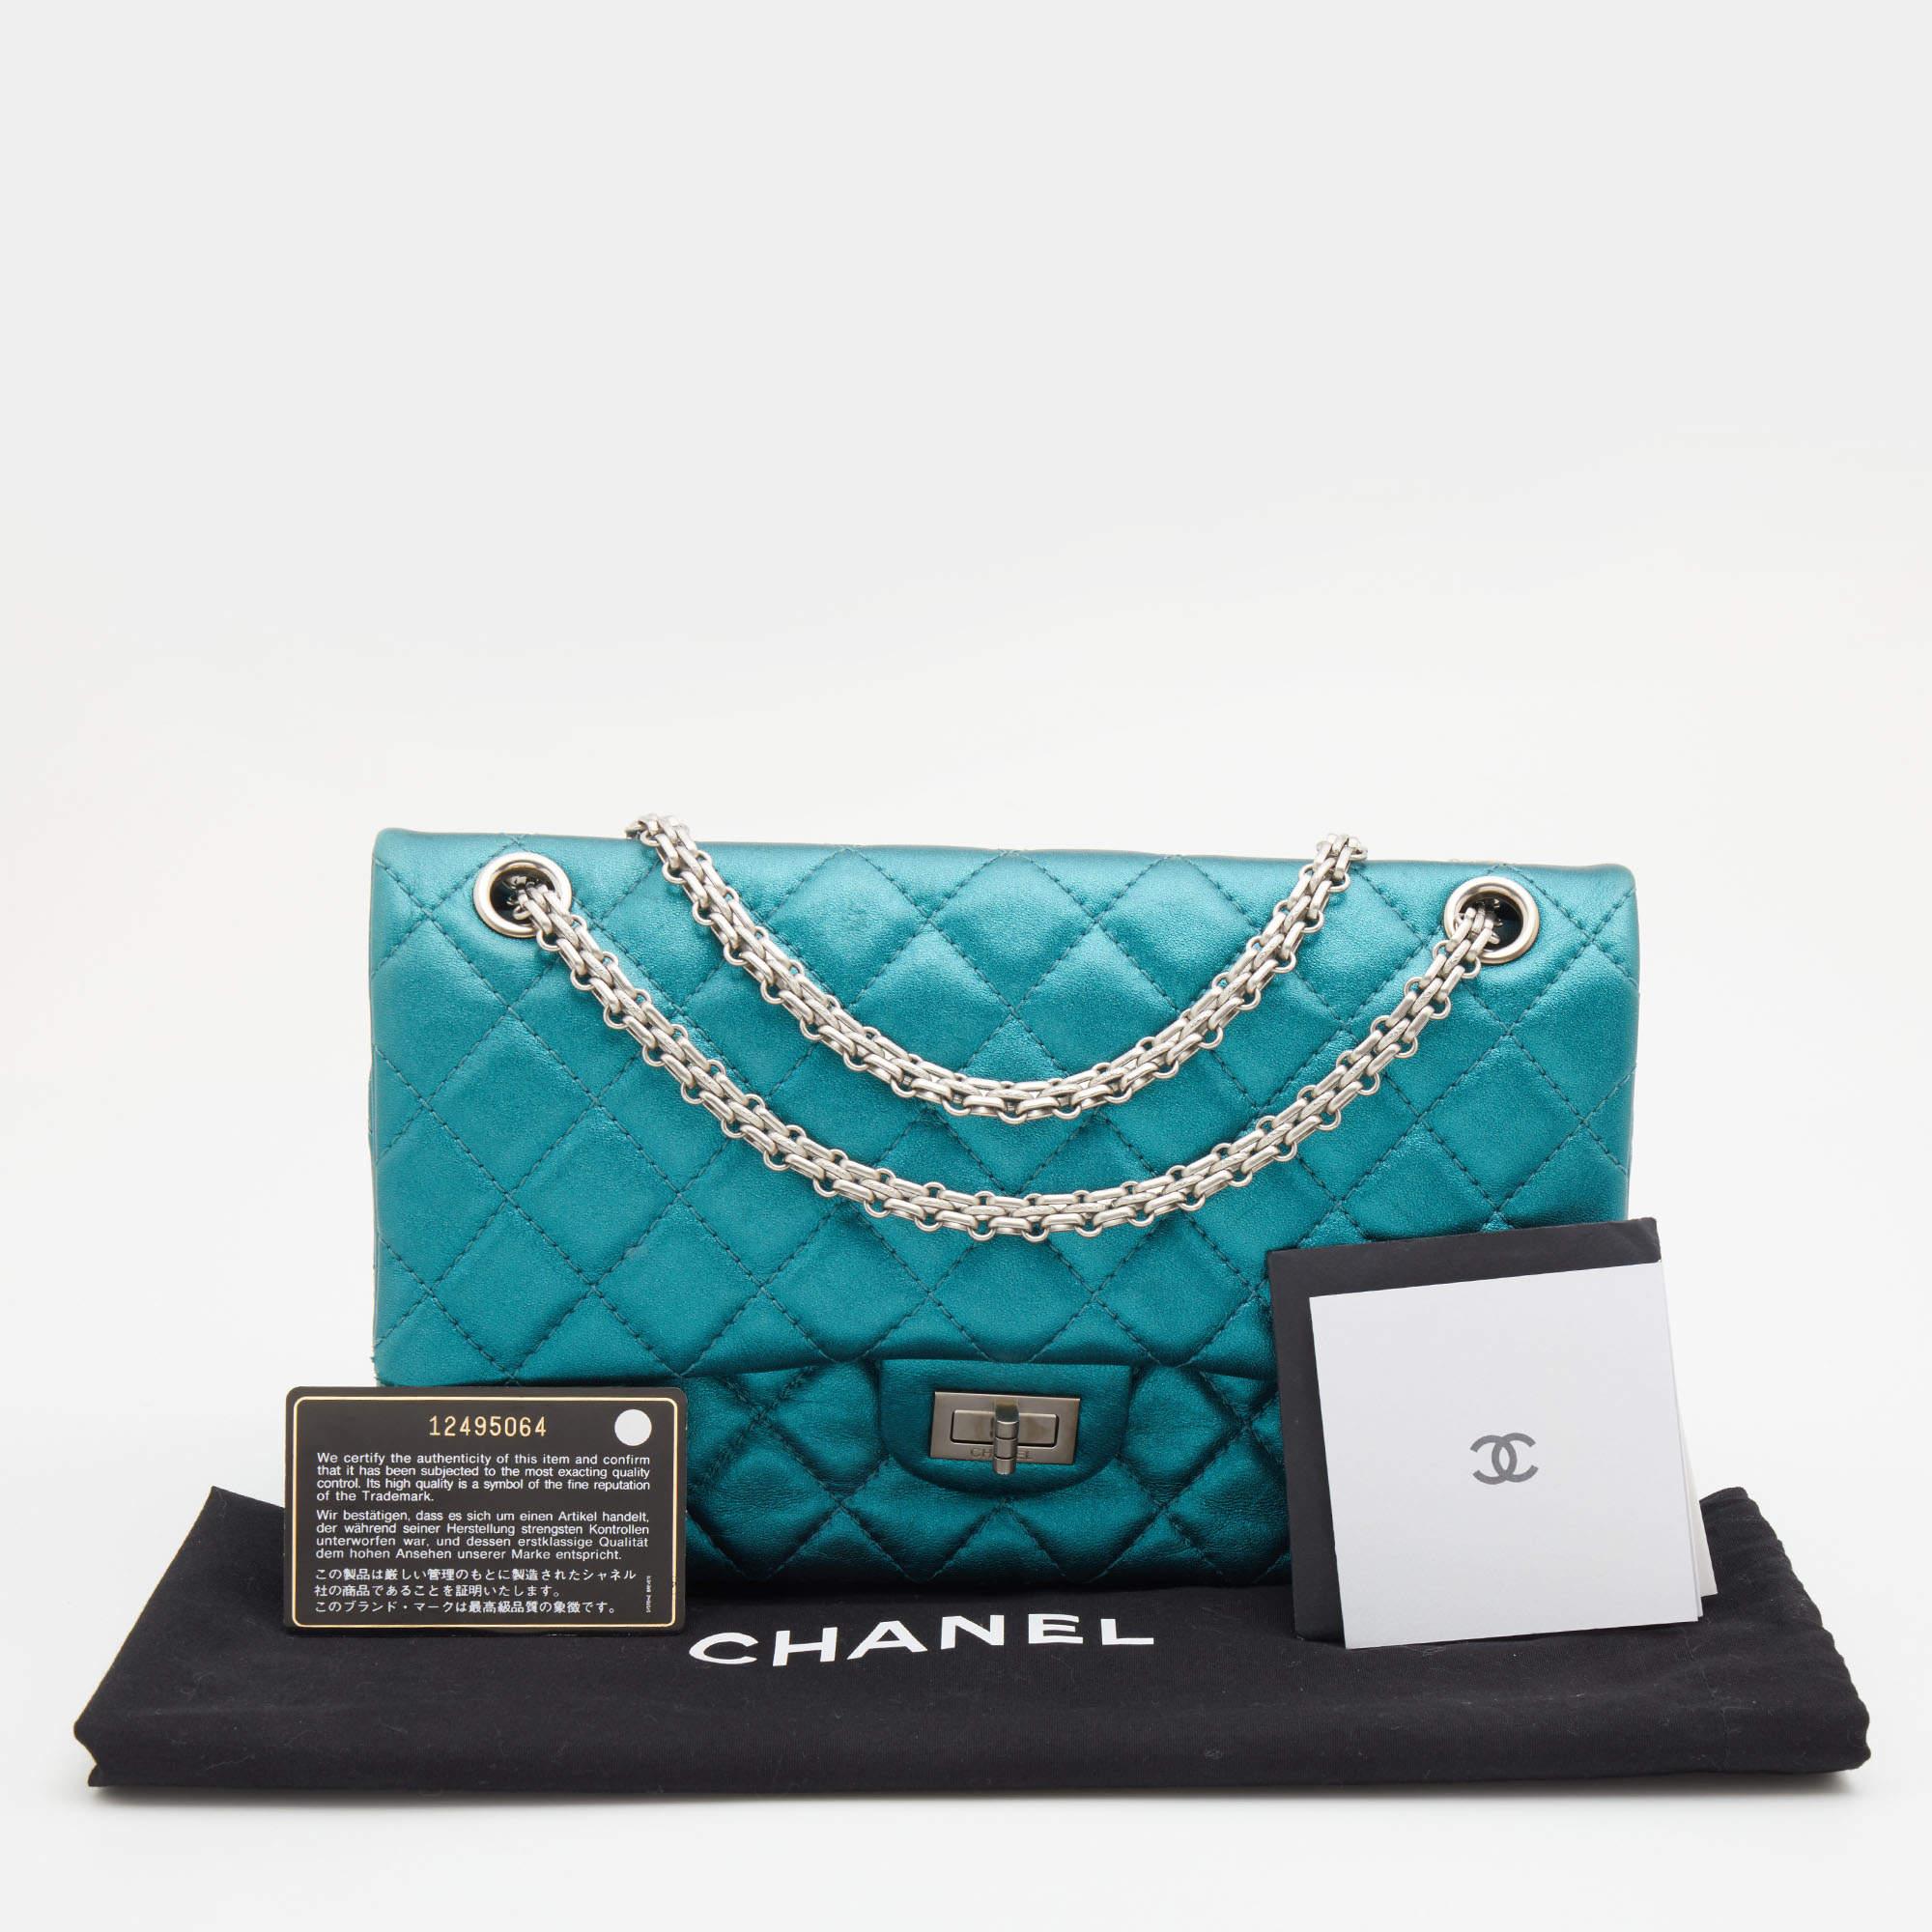 Chanel Metallic Teal Blue Quilted Leather Reissue 2.55 Classic 226 Flap Bag 4